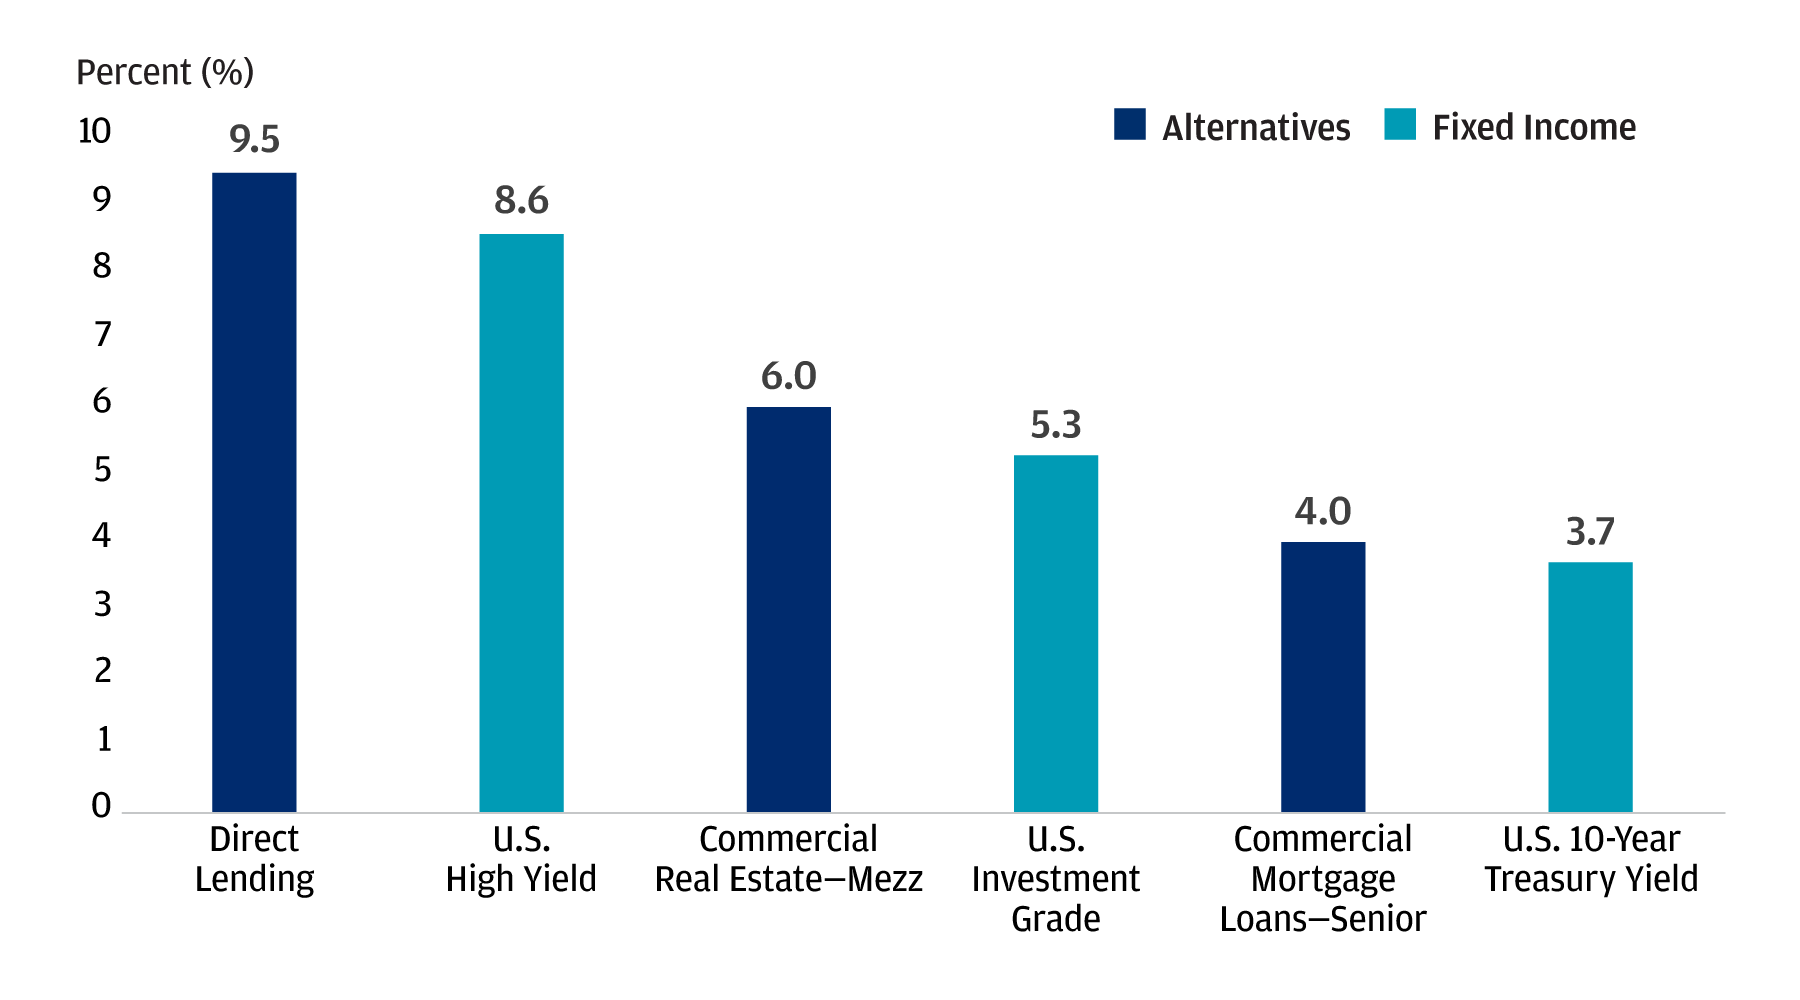 Visual depicting the historical asset class yields of Direct Lending as an asset class in comparison to U.S. high yield, Commercial real estate (CRE) mezzanine yield, U.S. investment grade, Commercial mortgage loans-senior and U.S. 10-year Treasury yield, respectively.